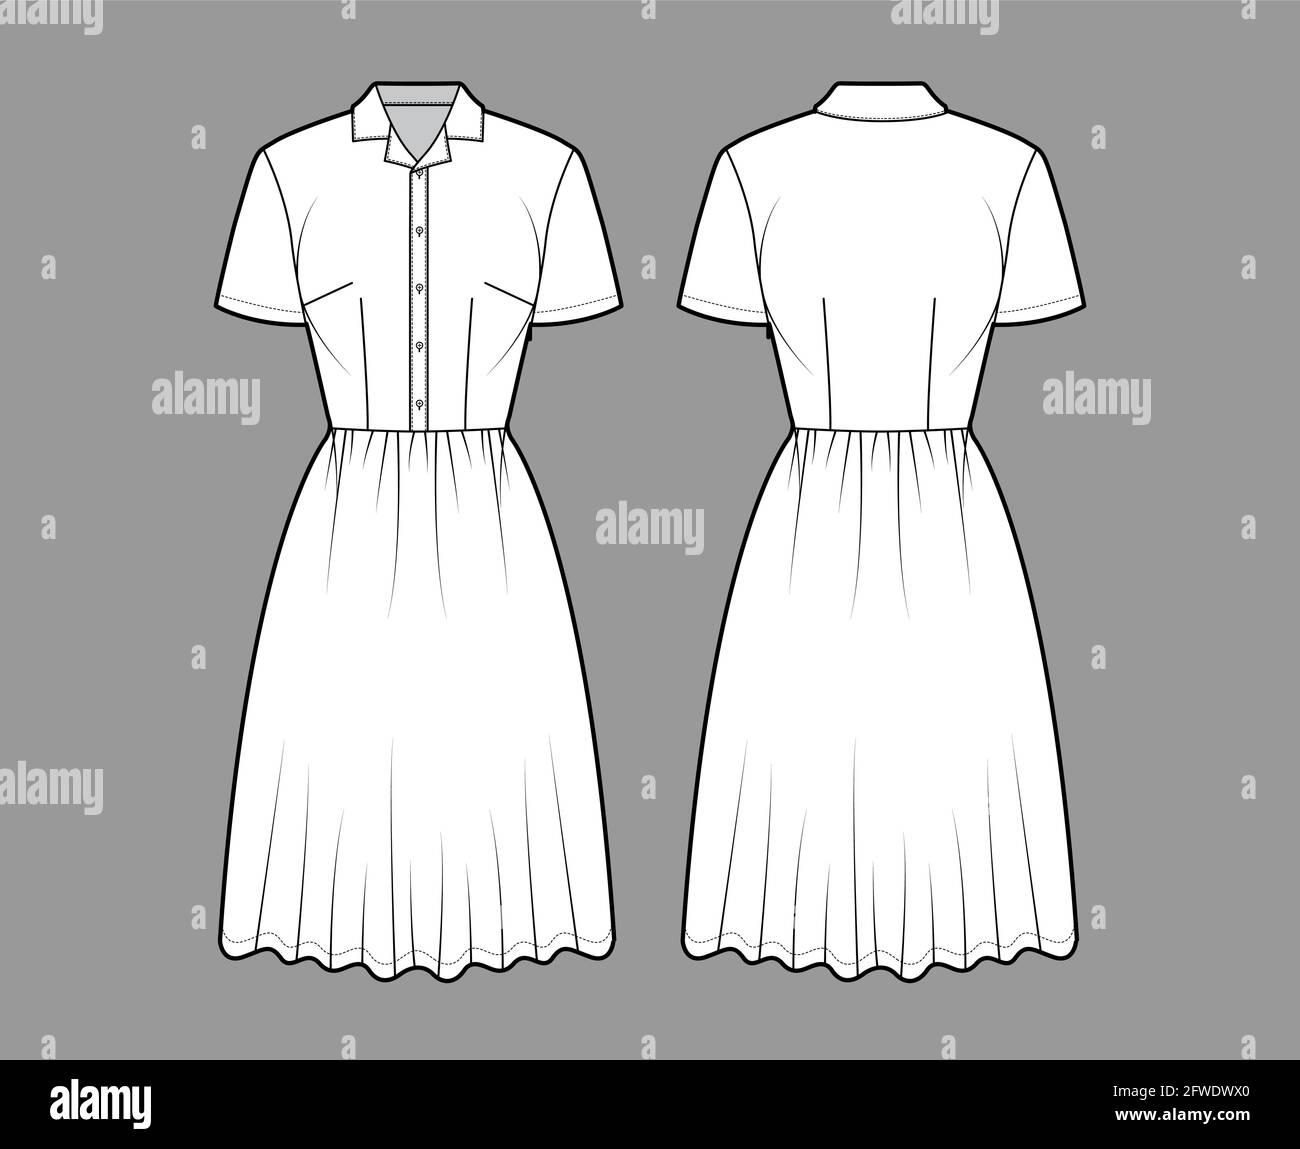 Dress house shirt technical fashion illustration with short sleeves, knee length full skirt, classic henley collar. Flat apparel front, back, white color style. Women, men unisex CAD mockup Stock Vector